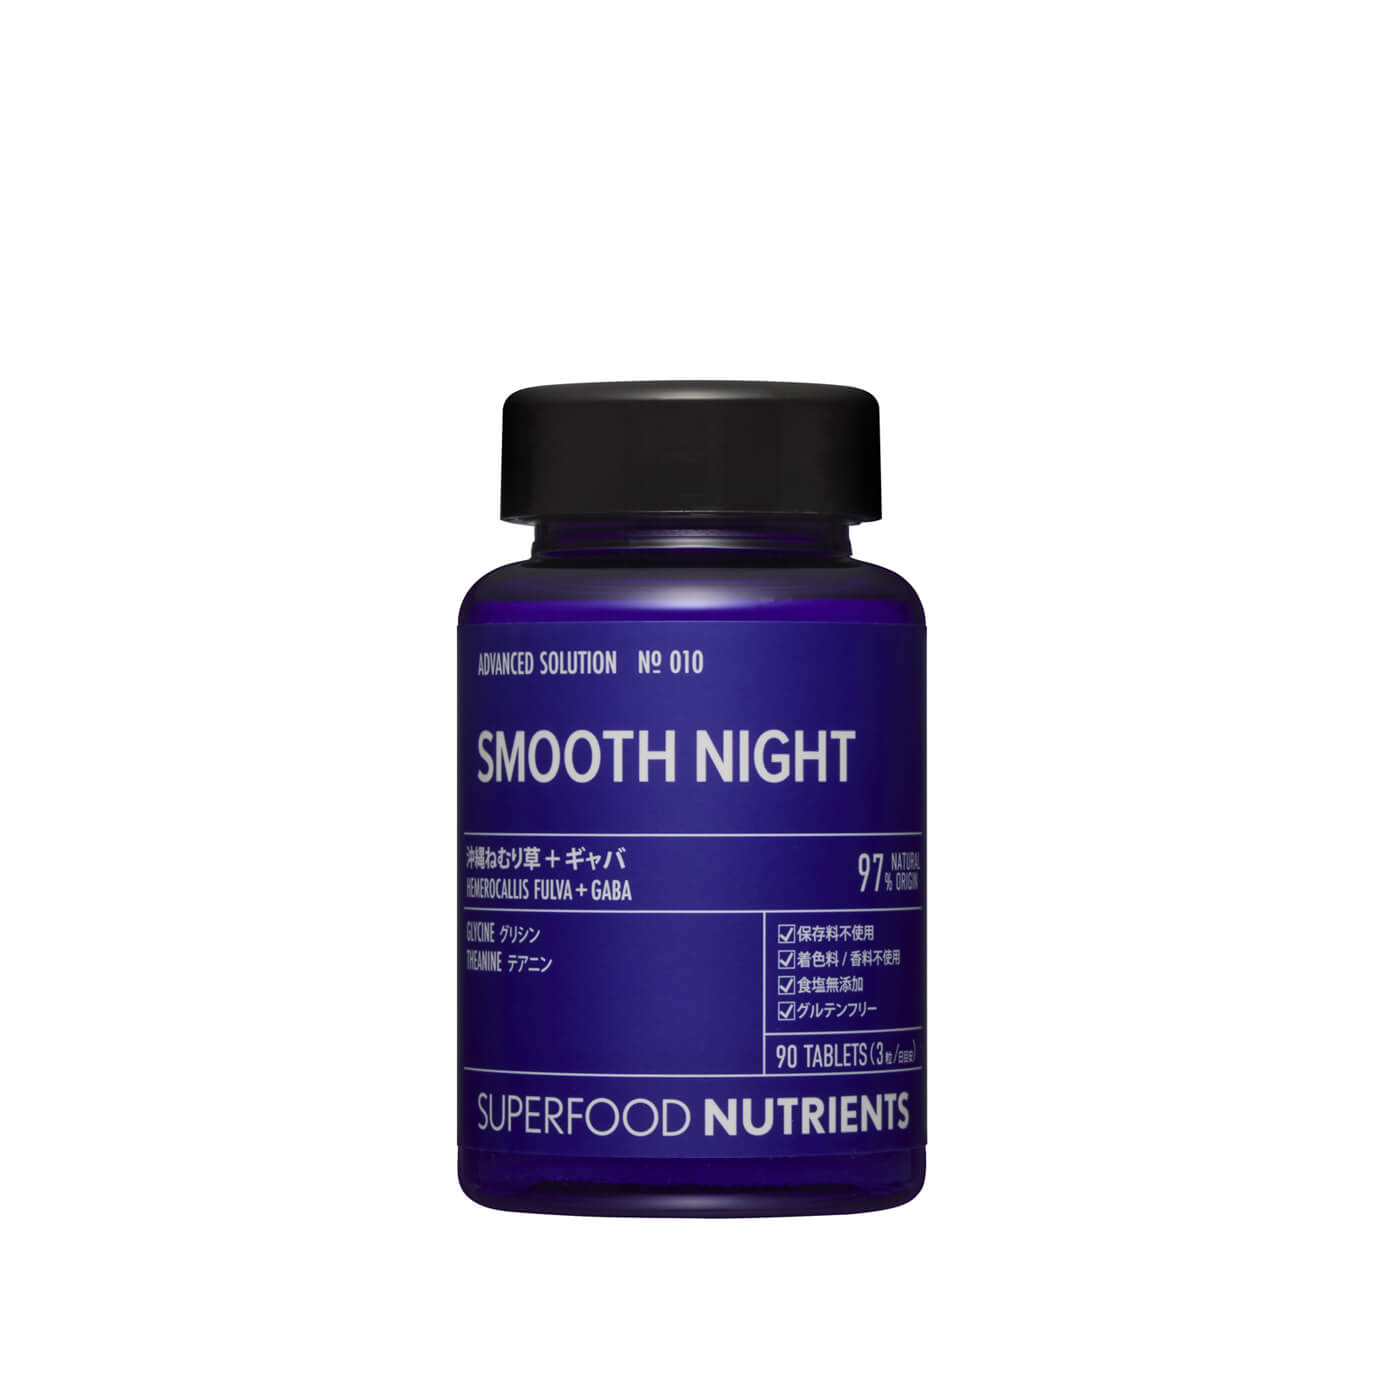 SUPERFOOD NUTRIENTS No.010 / SMOOTH NIGHT
